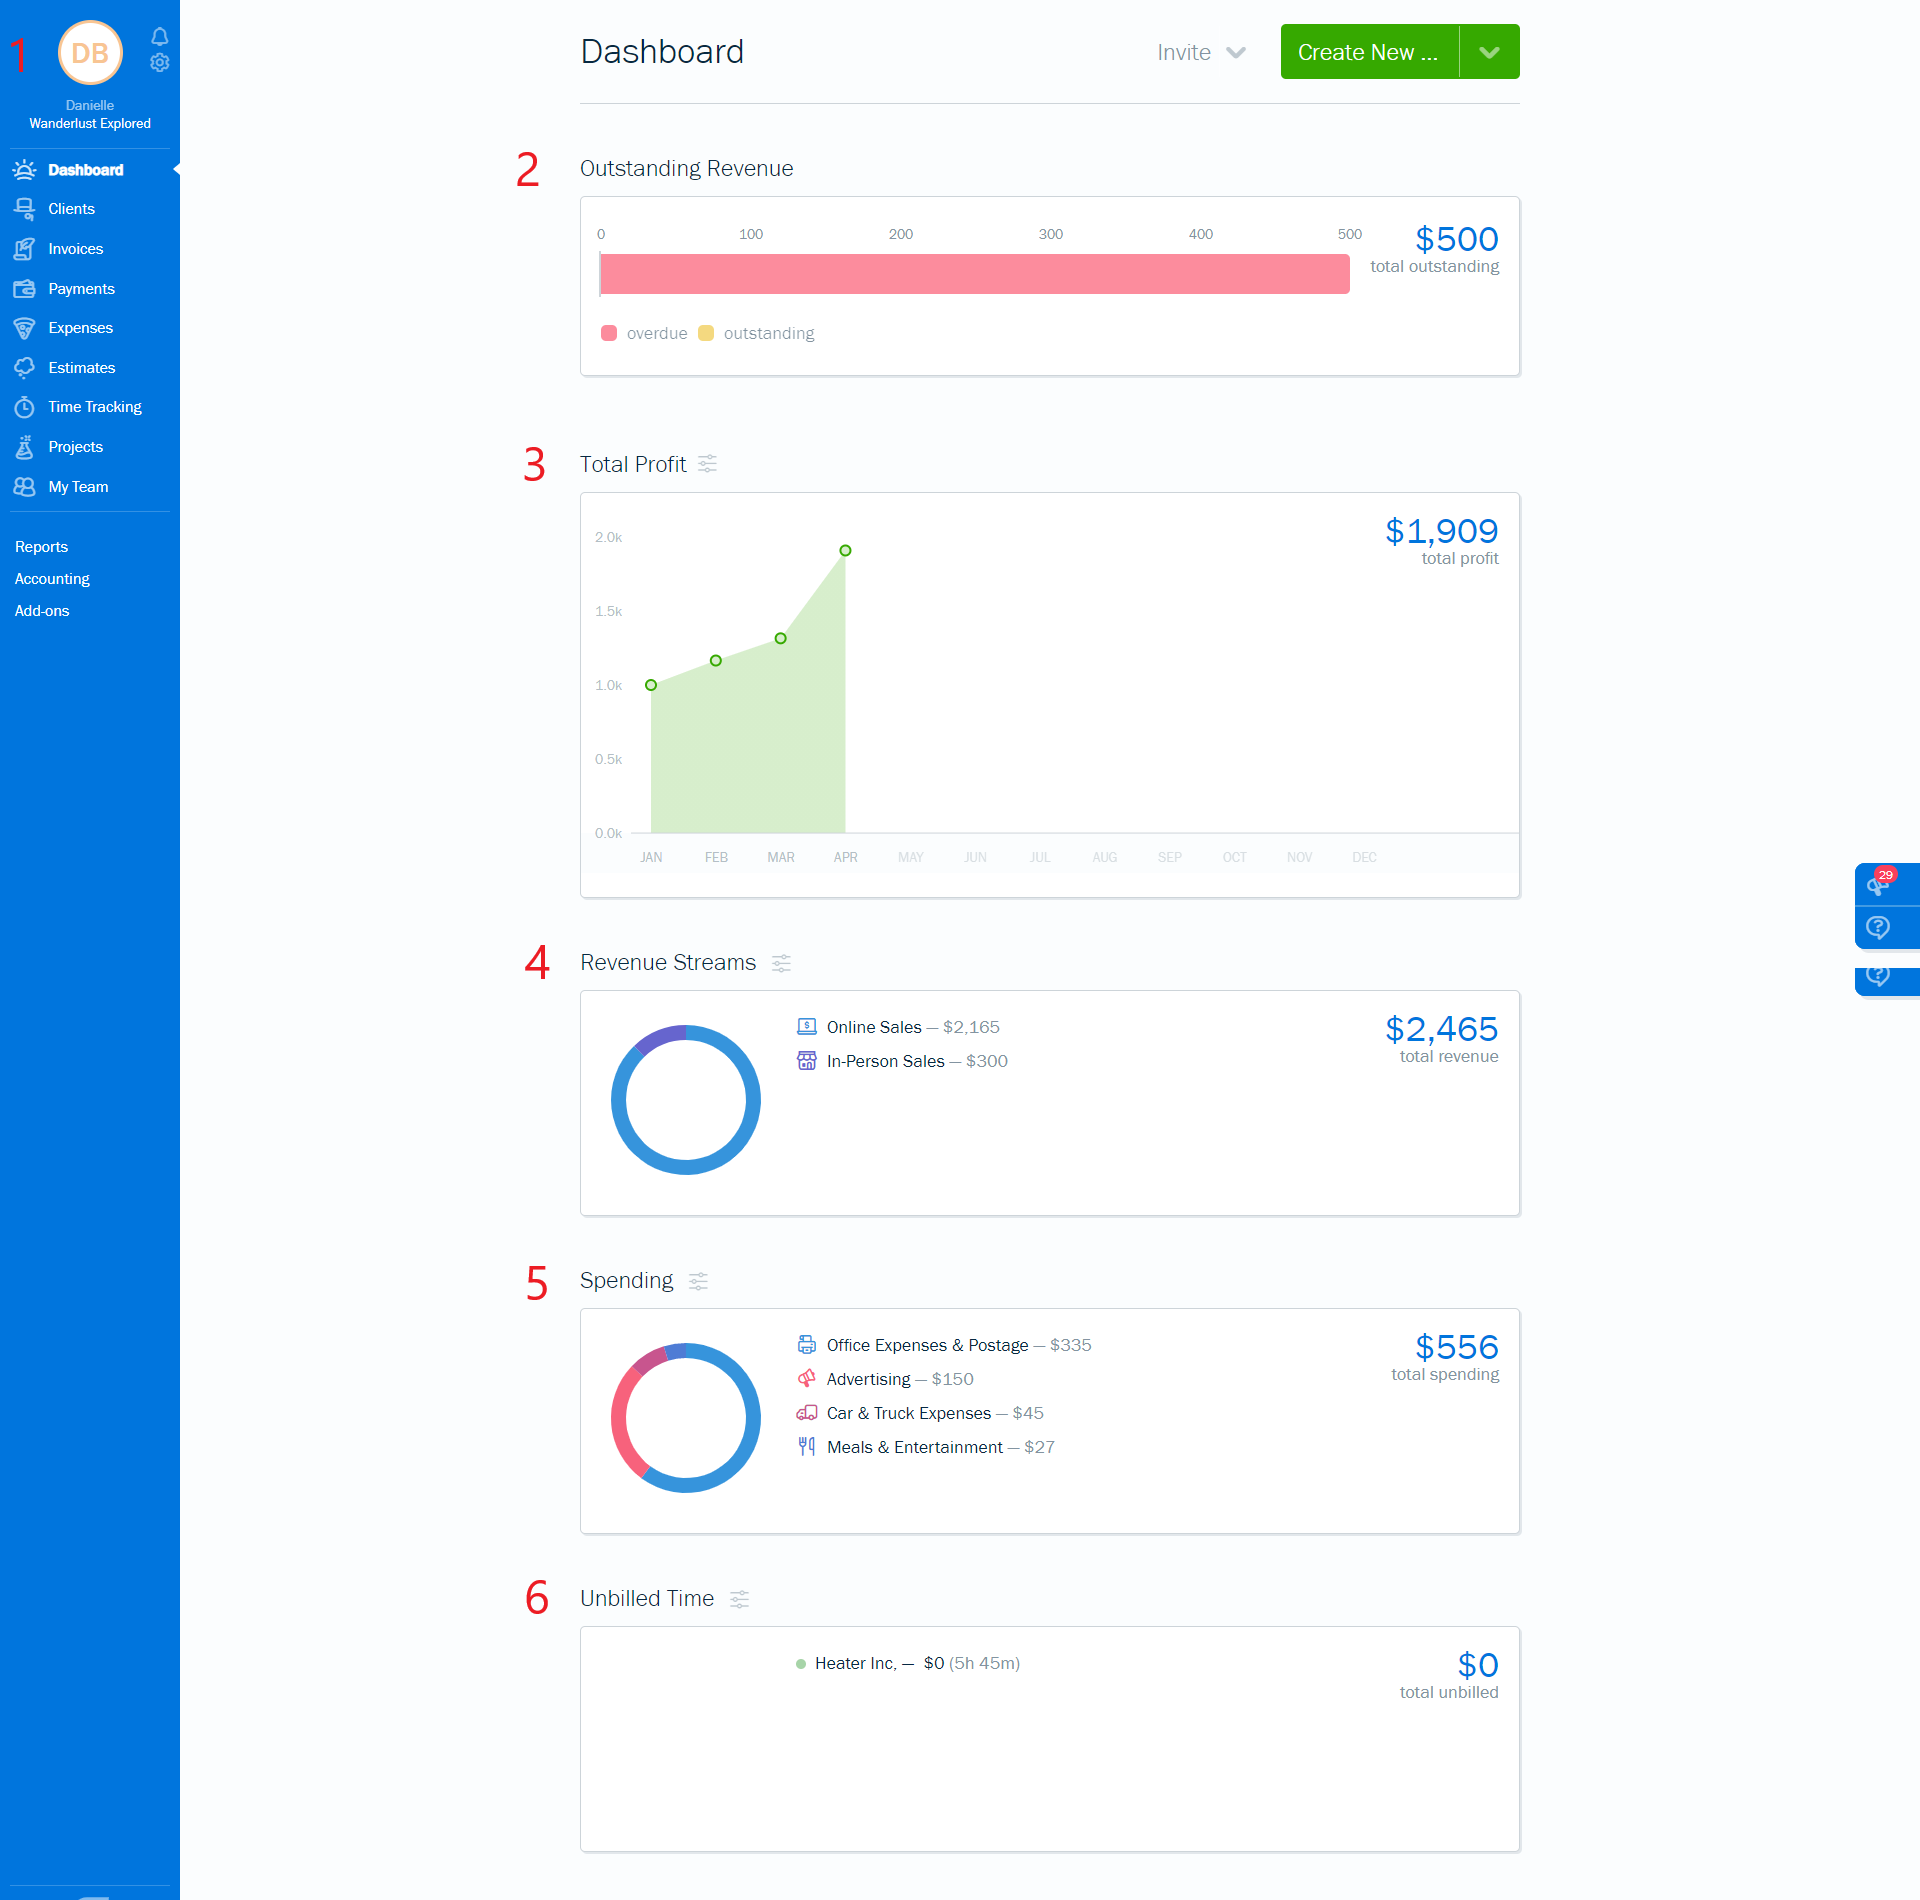 image of FreshBooks dashboard that shows outstanding revenue, total profit, revenue streams, spending, and unbilled time.